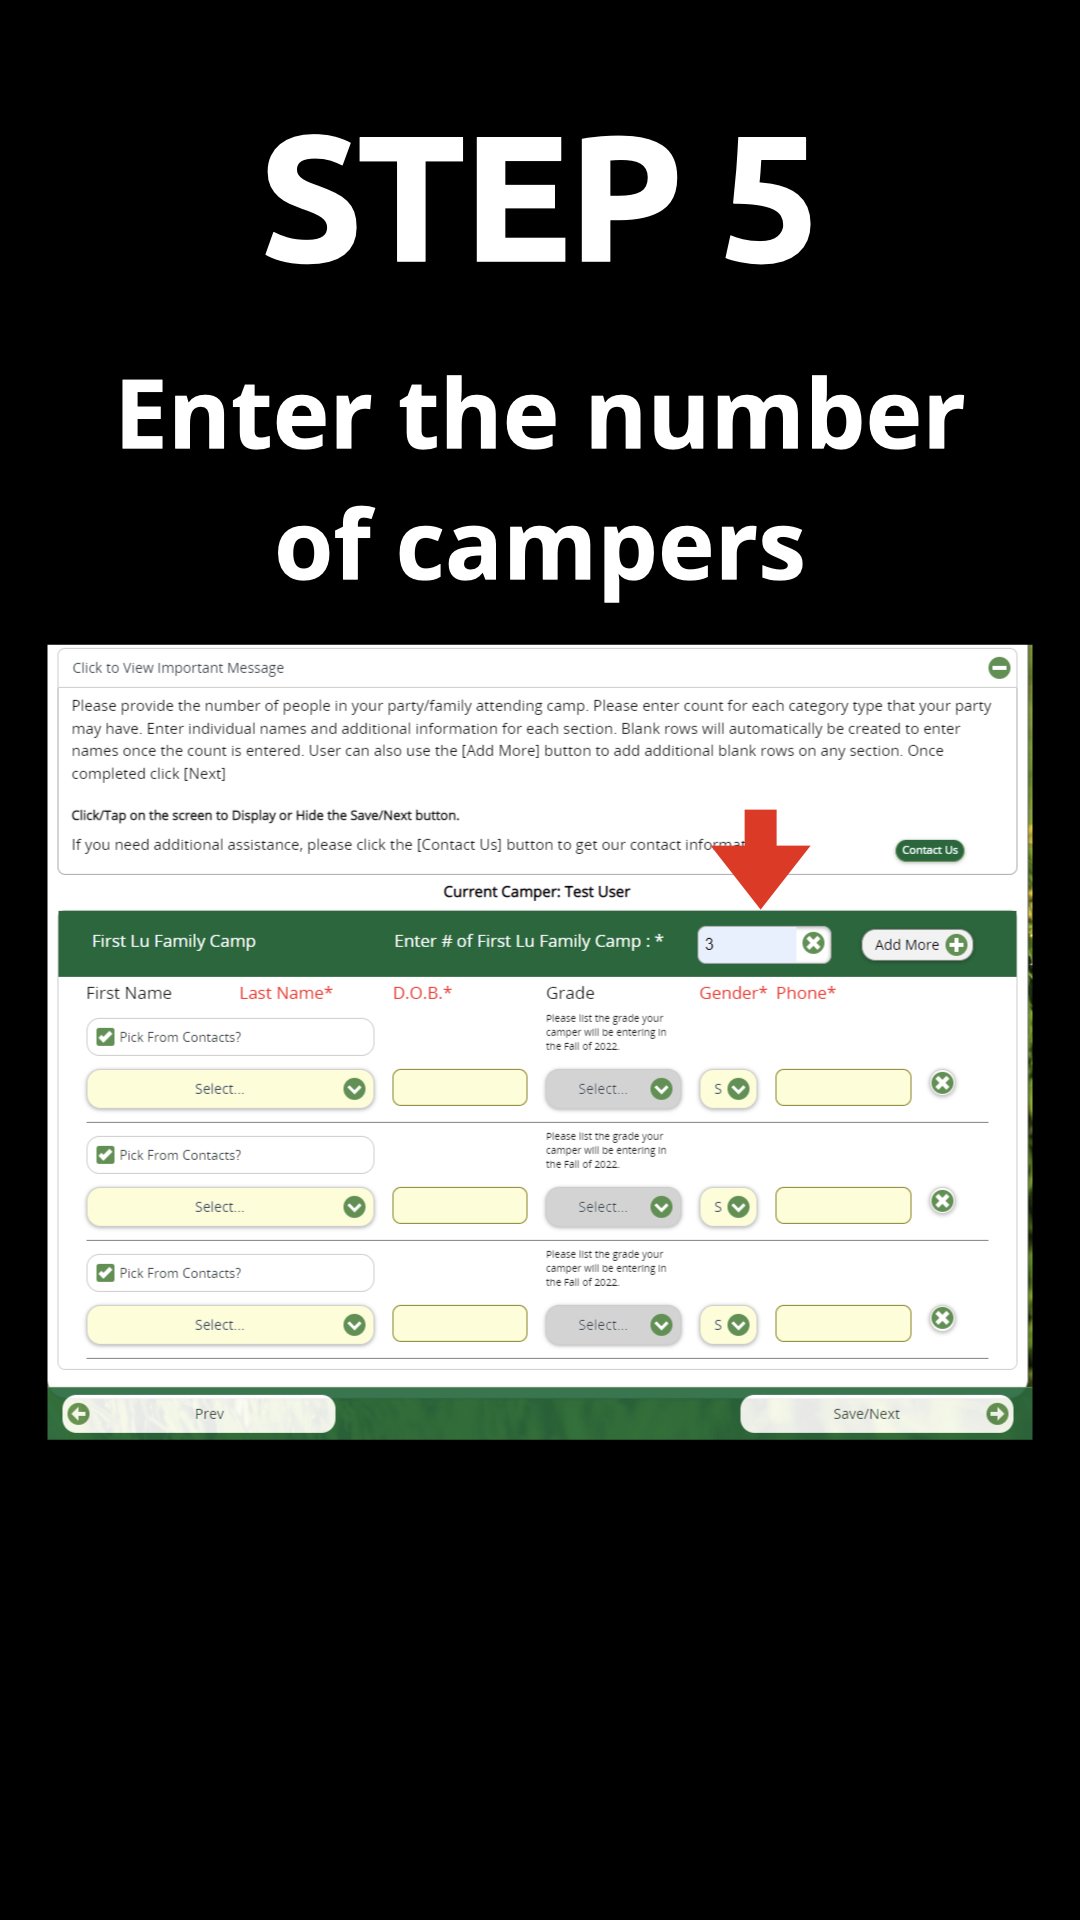  In the “Enter # of First Lu Family camp” field: enter # of people in your family  Enter Name, DOB, Gender and Phone for each camper 